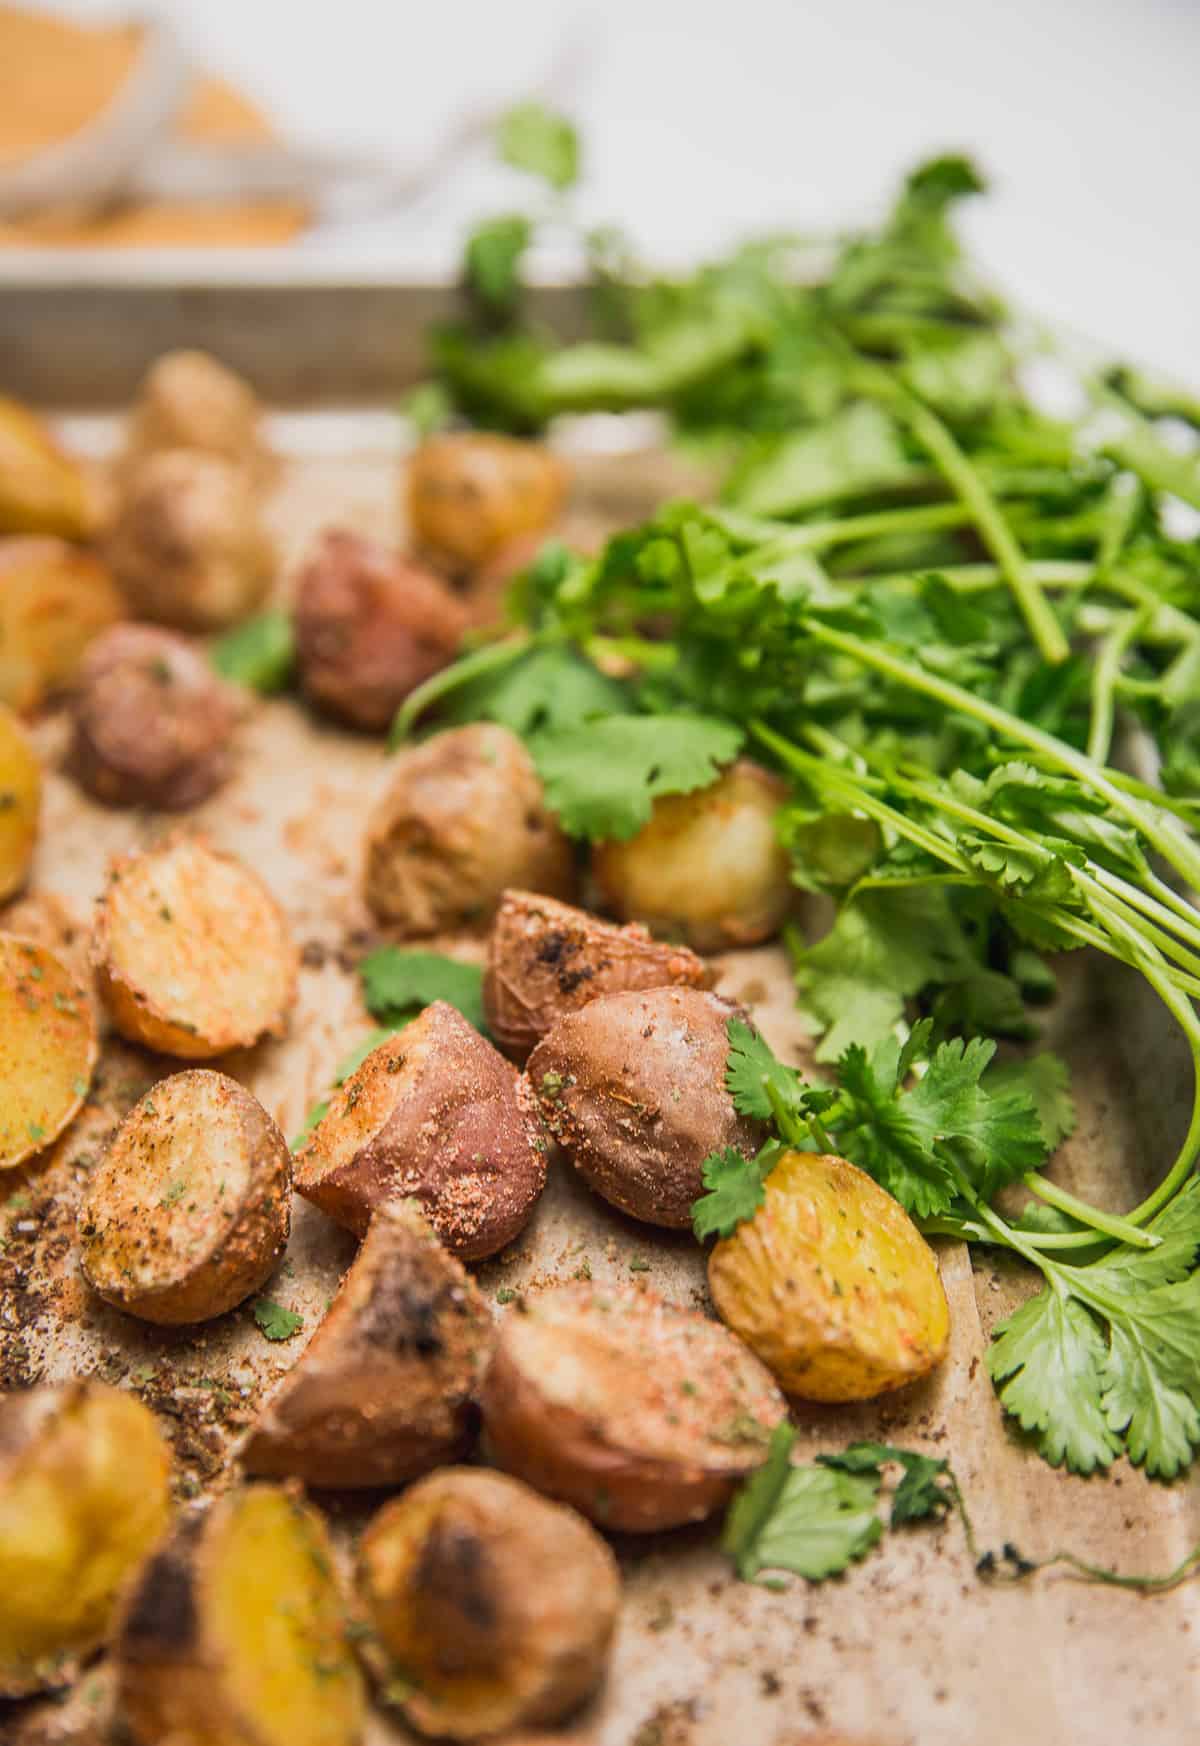 Seasoned Oven Roasted Baby Potatoes, plant based, vegan, vegetarian, whole food plant based, gluten free, recipe, wfpb, healthy, healthy vegan, oil free, no refined sugar, no oil, refined sugar free, dairy free, dinner party, entertaining,